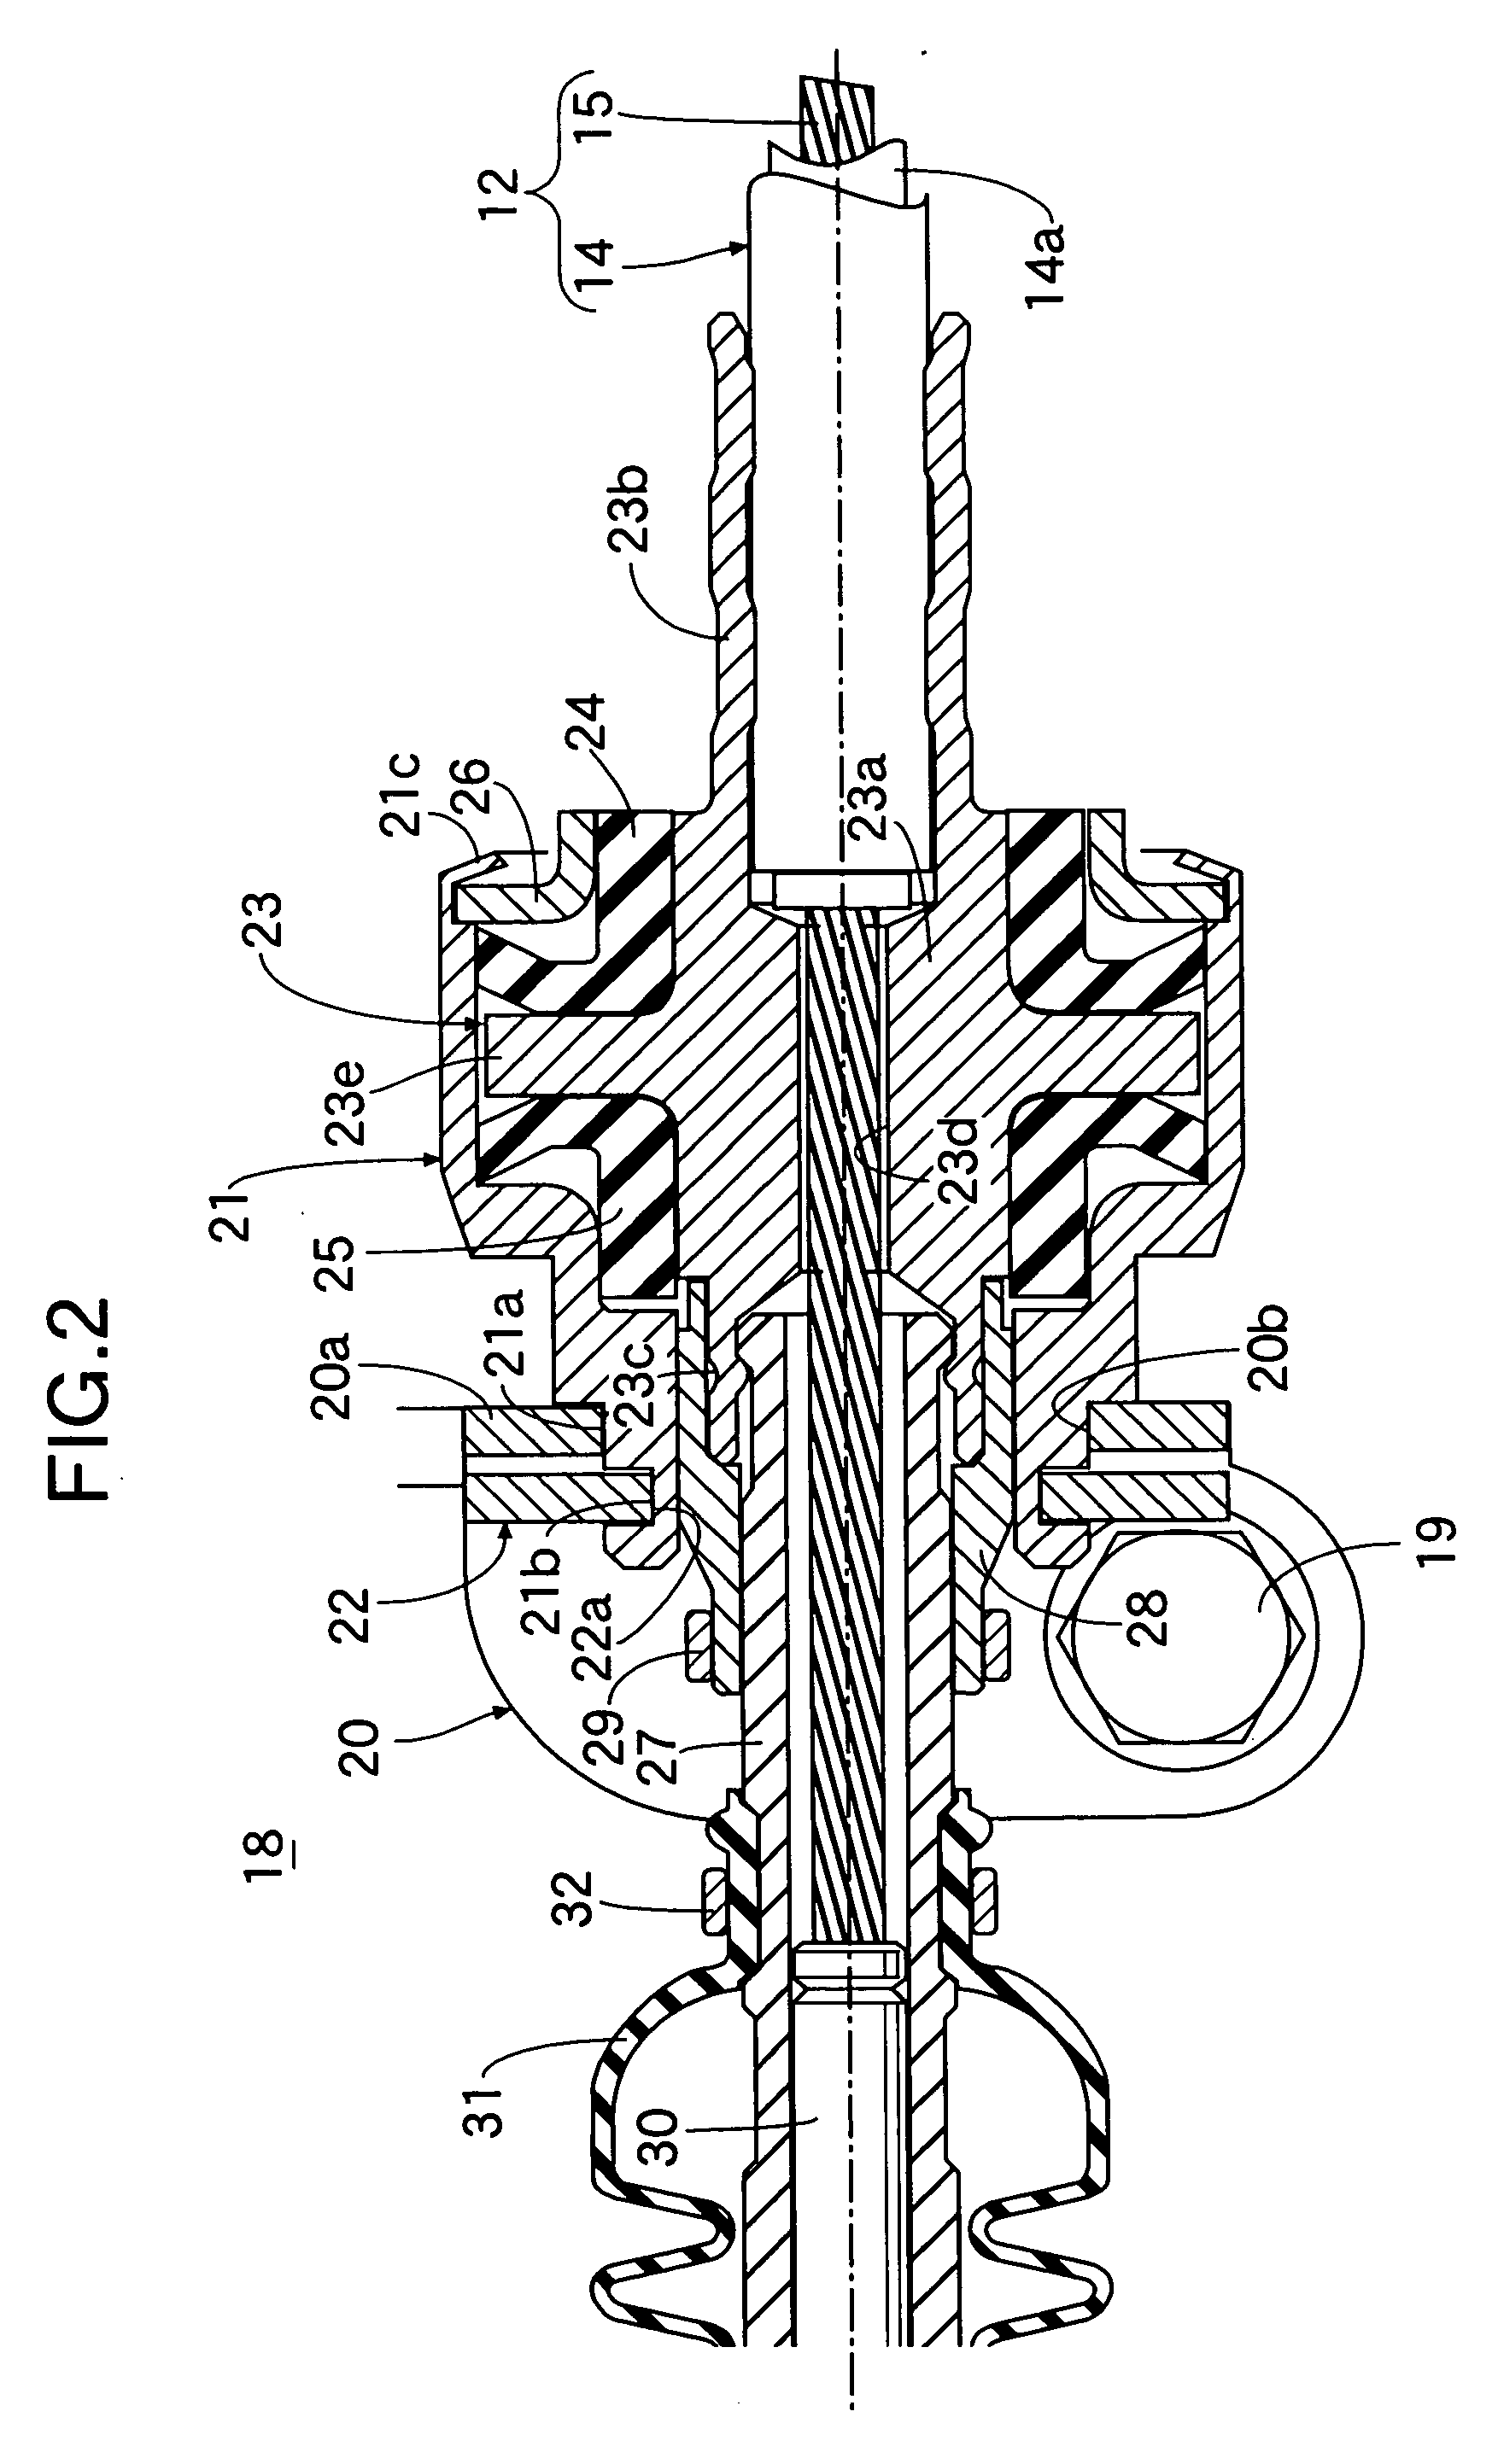 Rigidity tuning structure of transmission cable for manual transmission